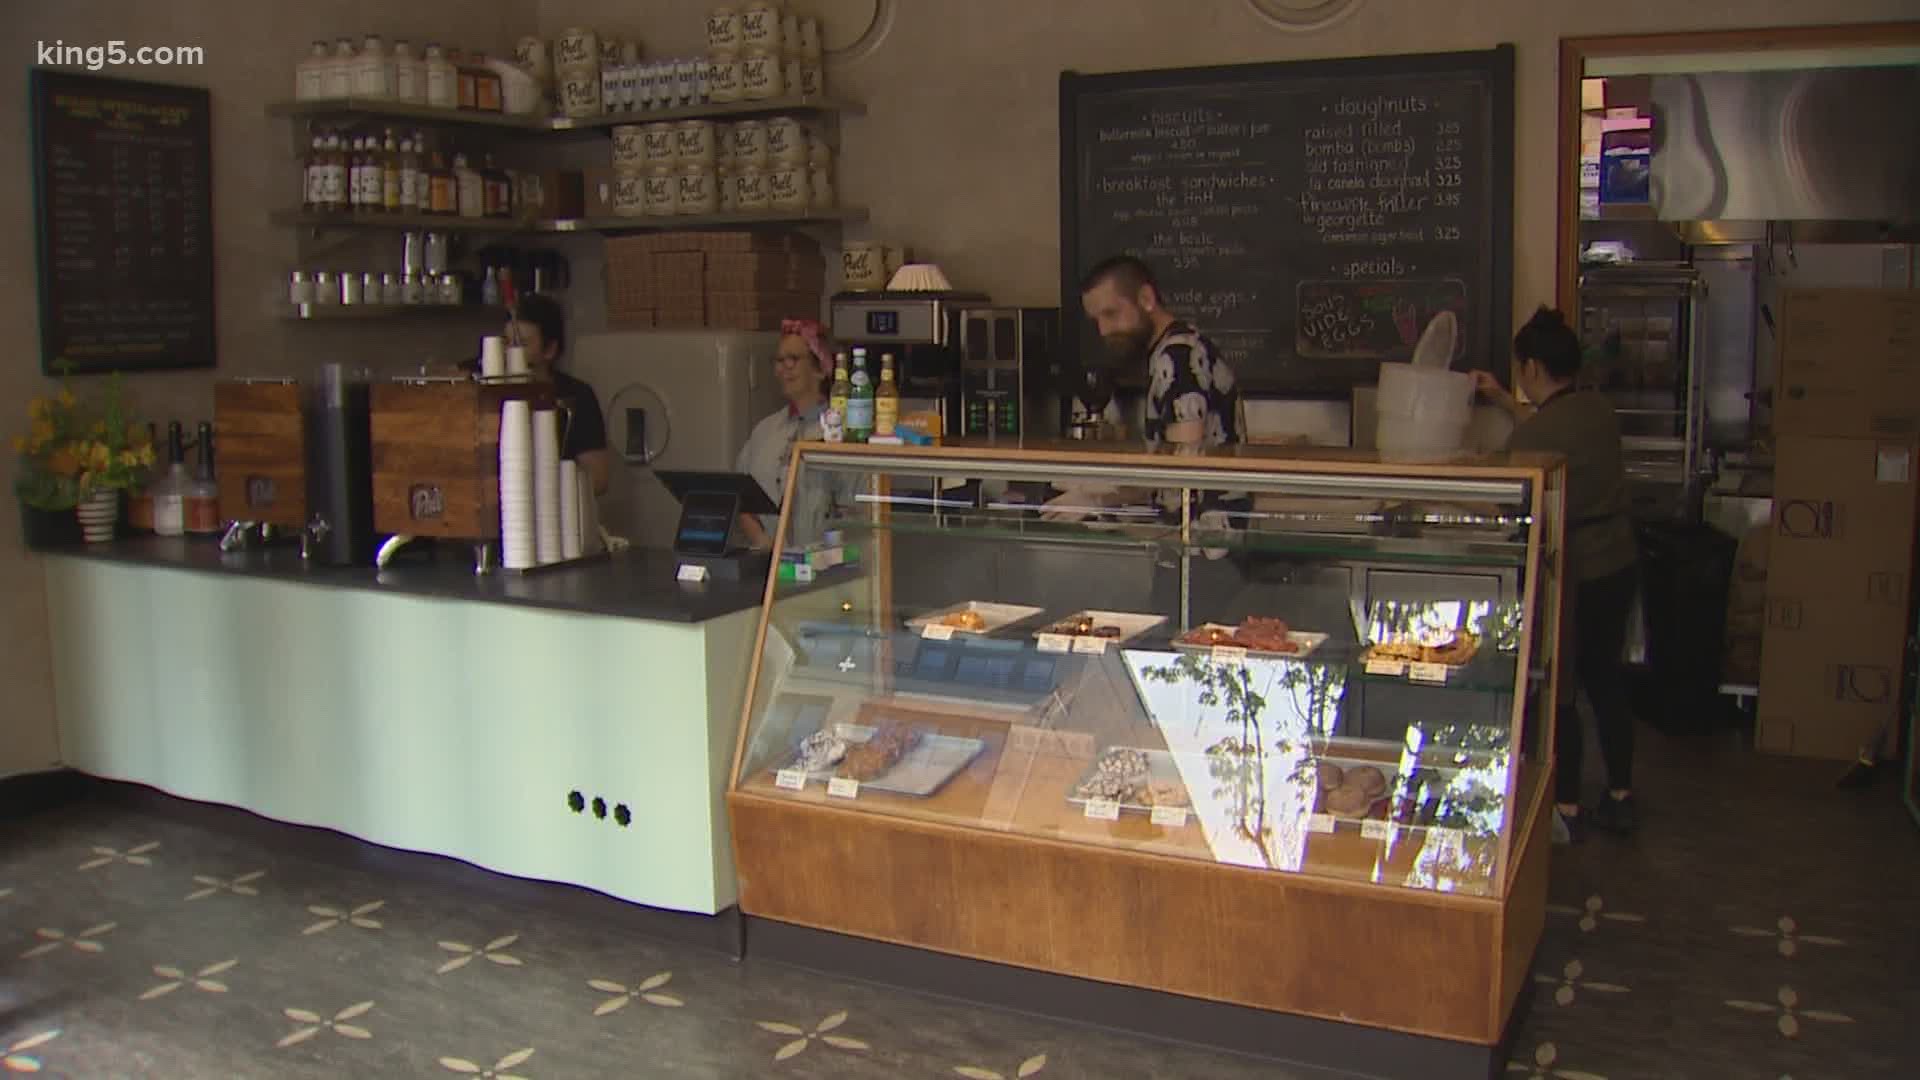 Small business owners in Seattle talk about the loans and grants being distributed to small businesses and how the system isn't perfect right now.